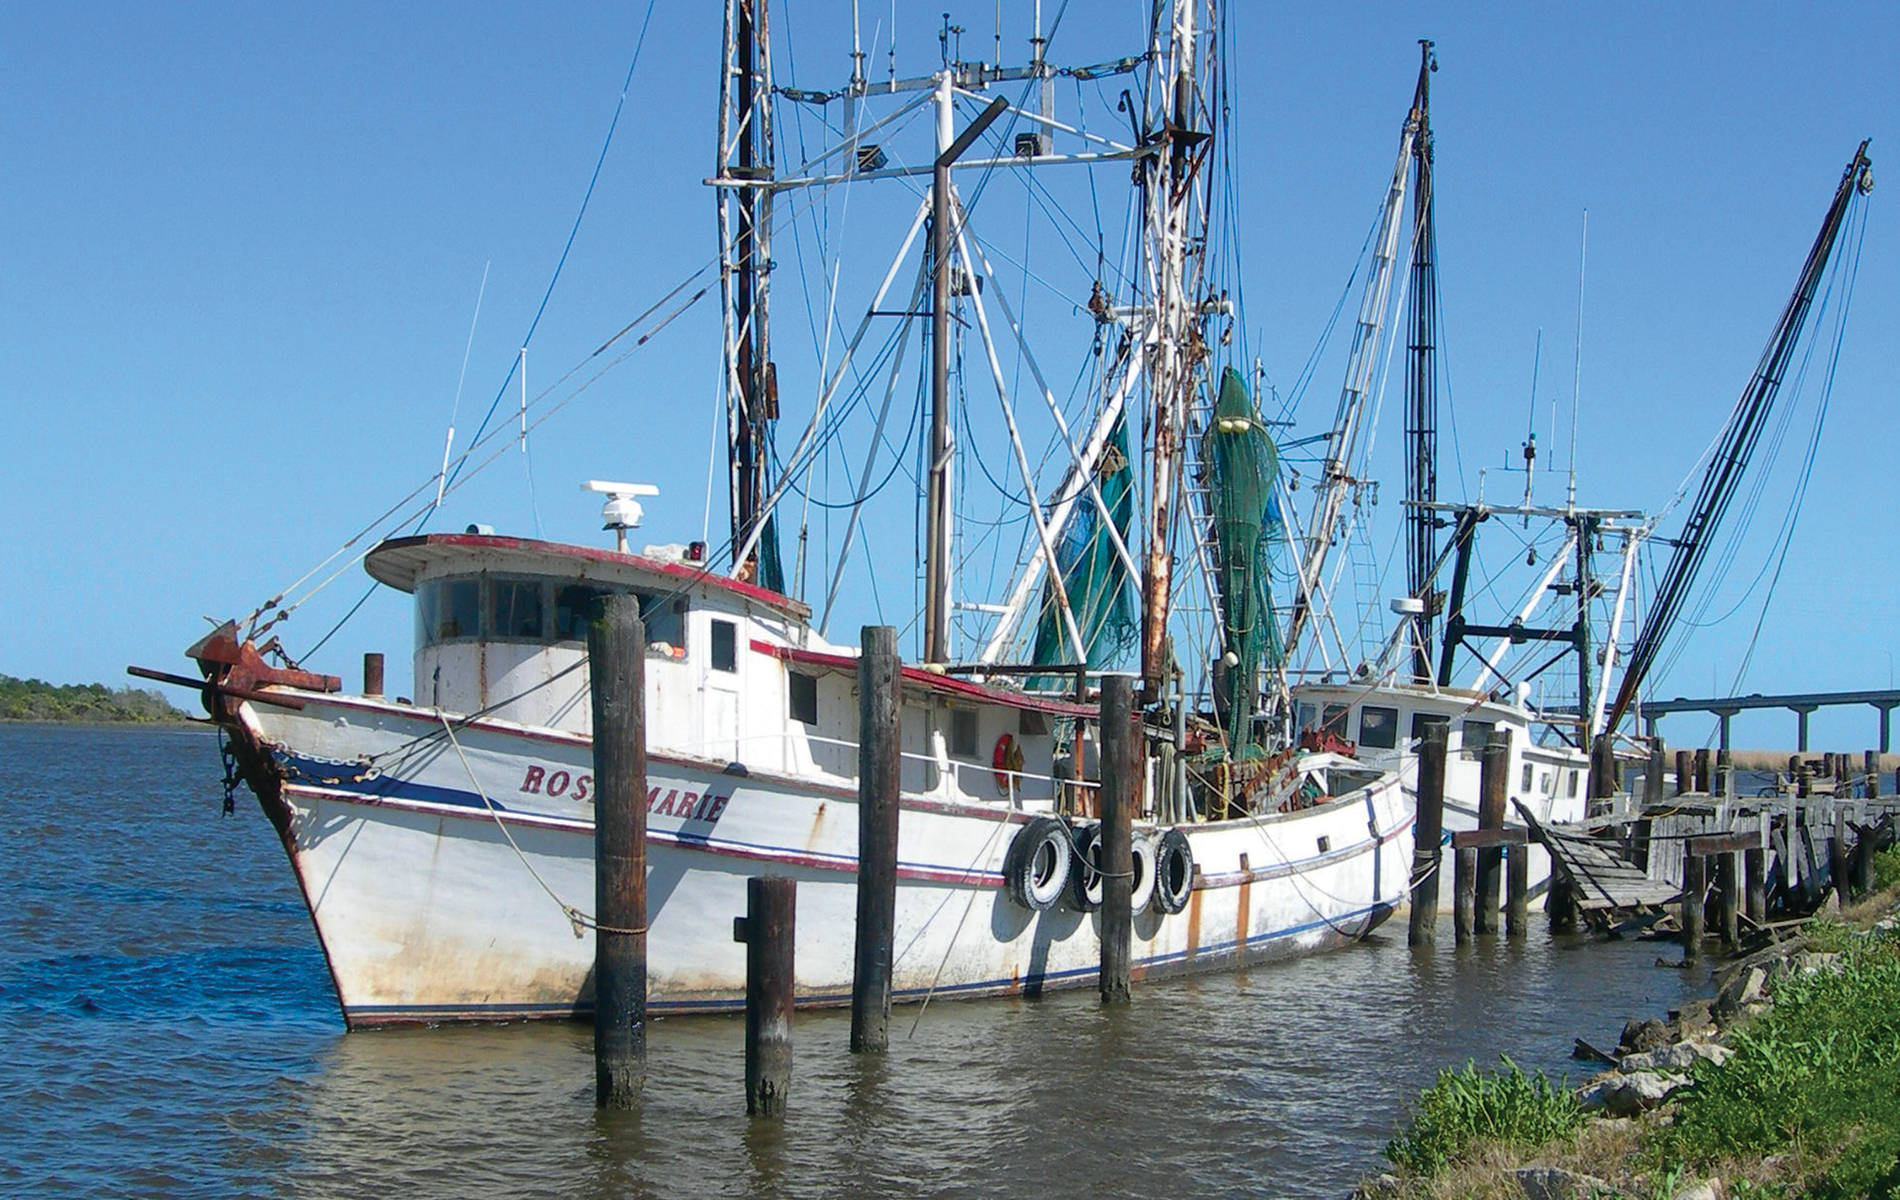 Boat in Apalachicola